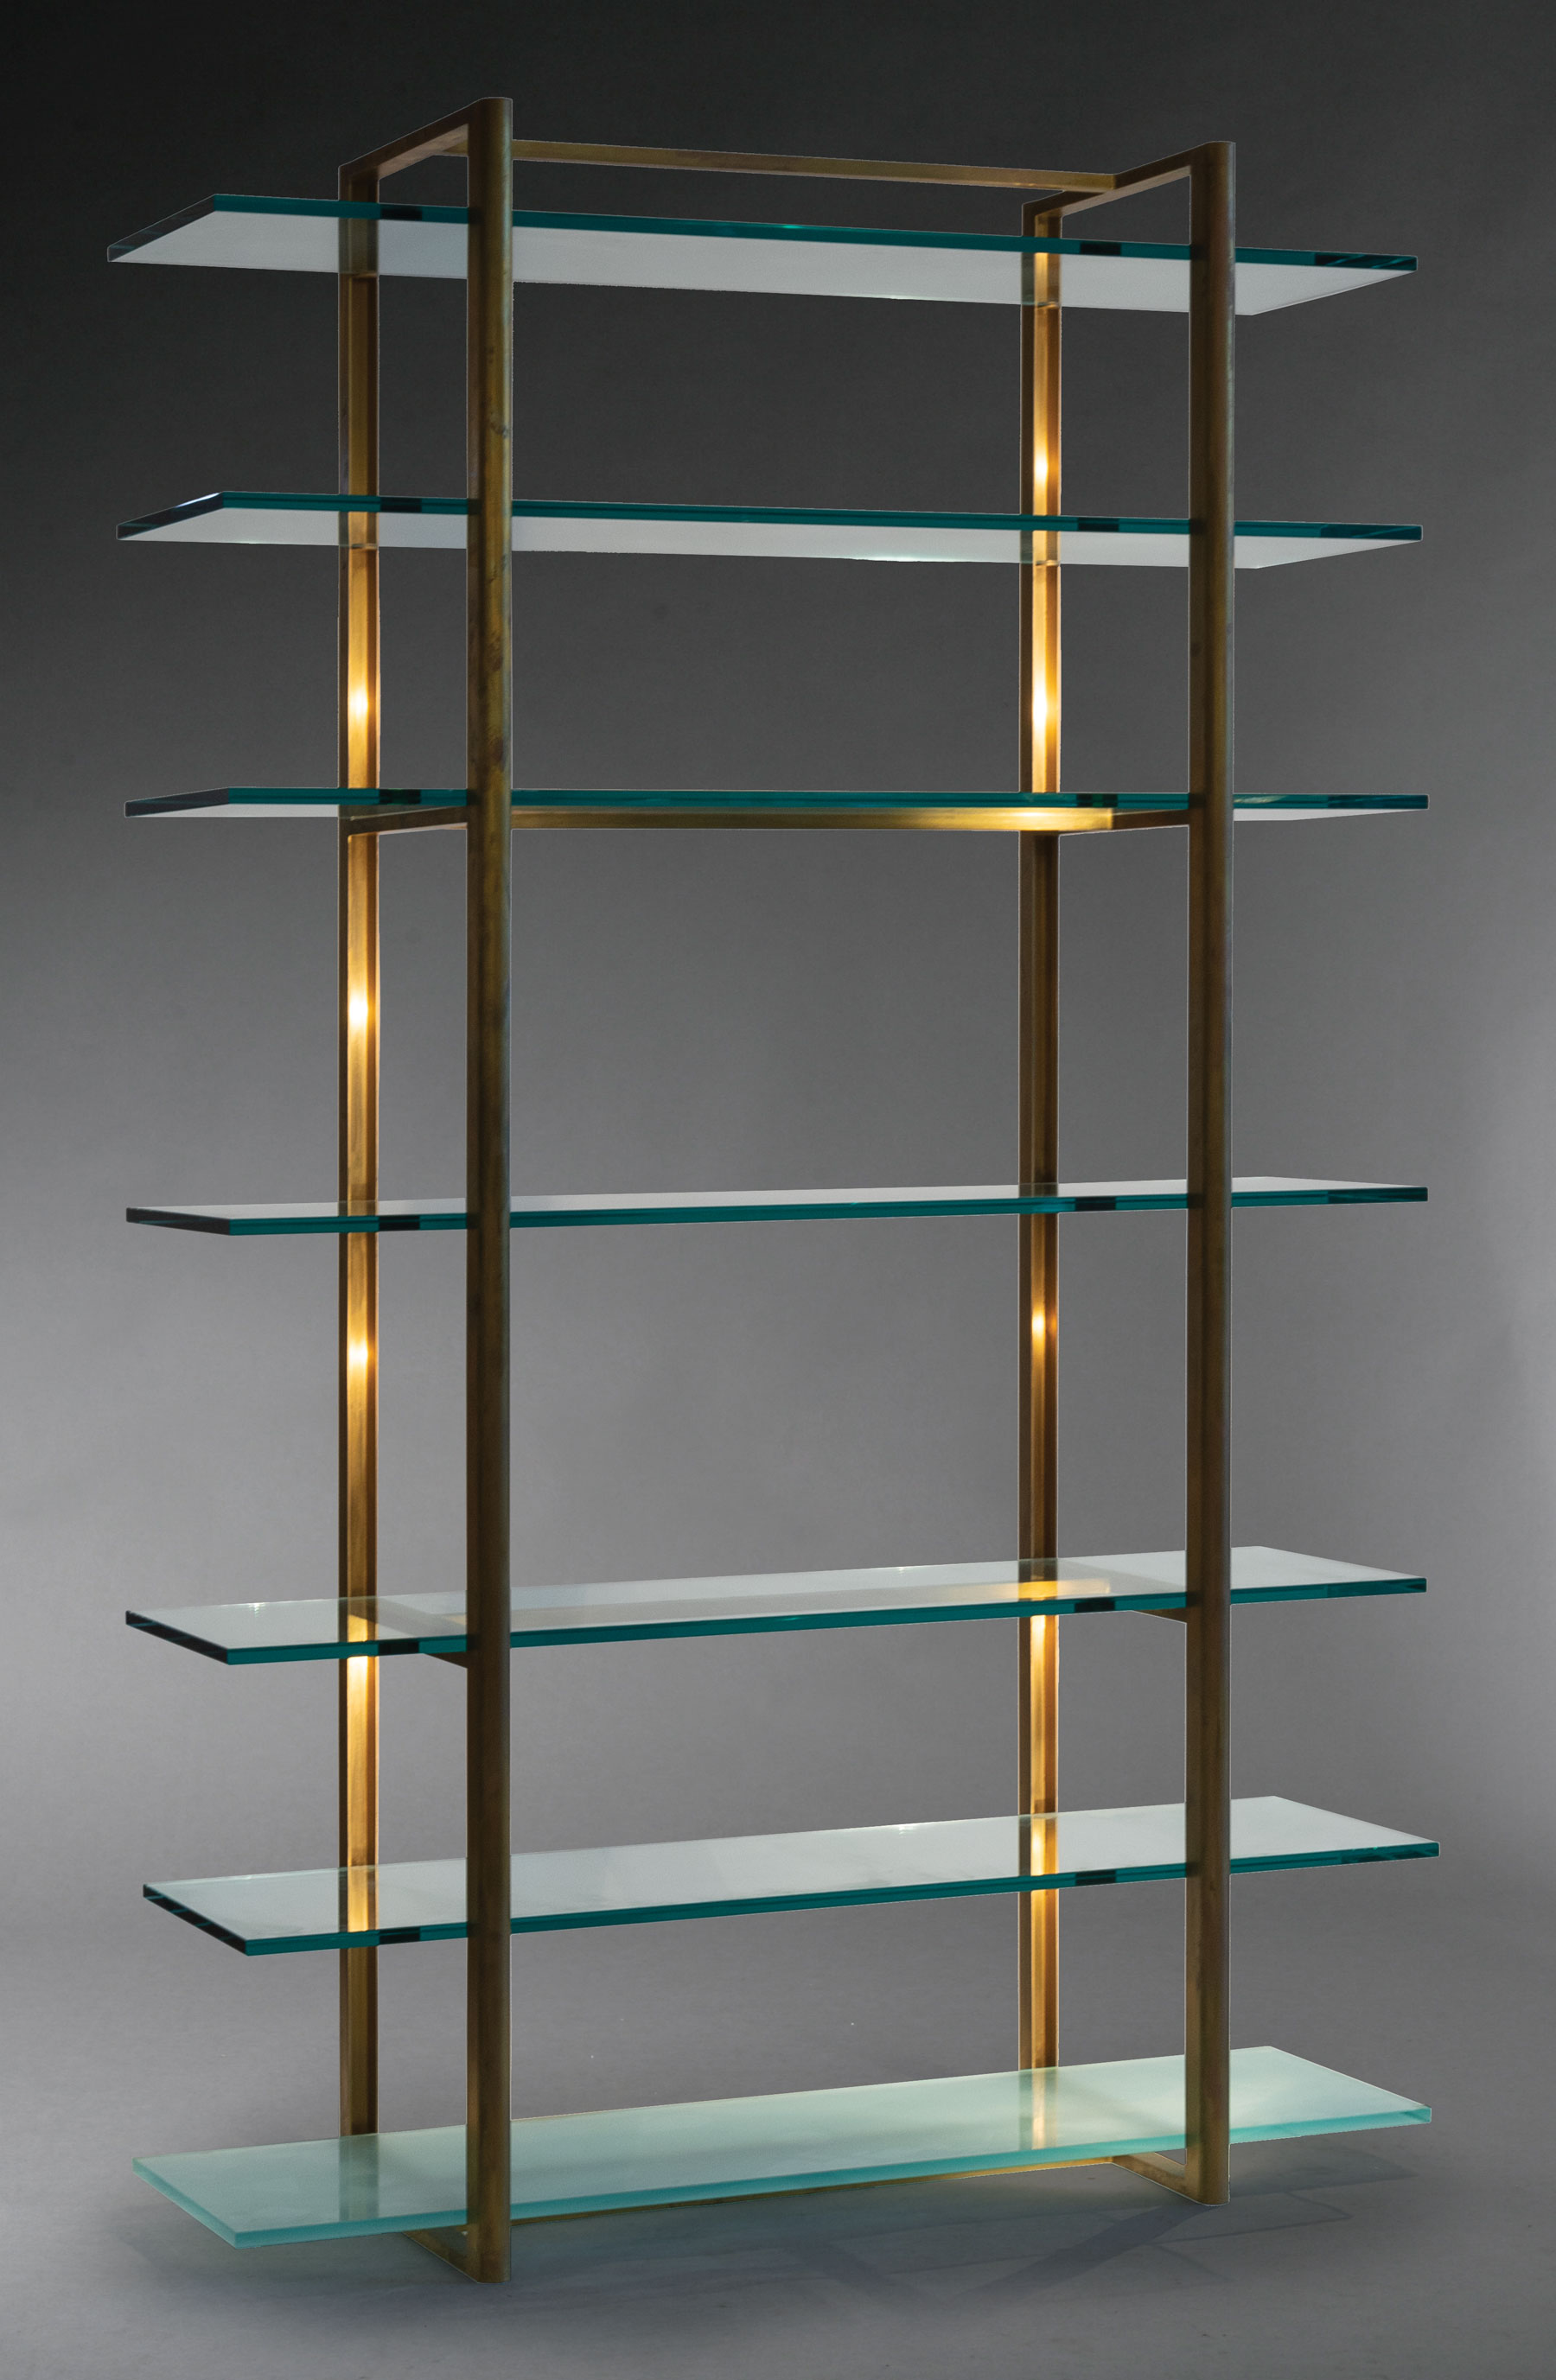 Contemporary Bronze and Glass Illuminated Etagere , 1993, designed by Ian J. Cohn of Diversity: - Image 2 of 2